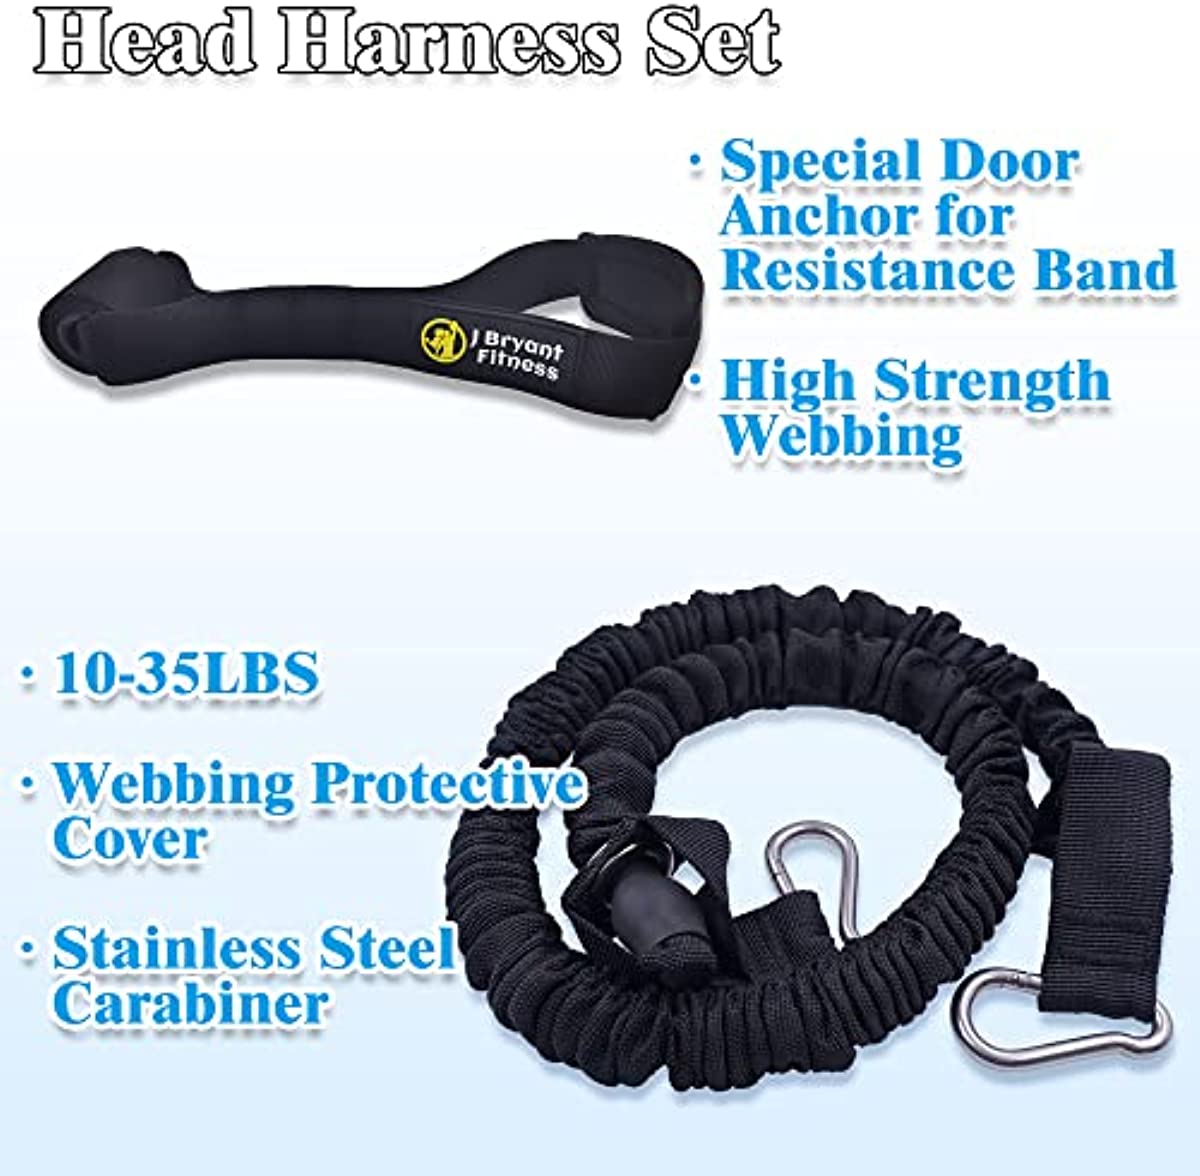 J Bryant Neck Harness Head - Weight Lifting with Resistance Tube Bands - Door Anchor Set Adjustable Neck Training Strap Exercise Equipment